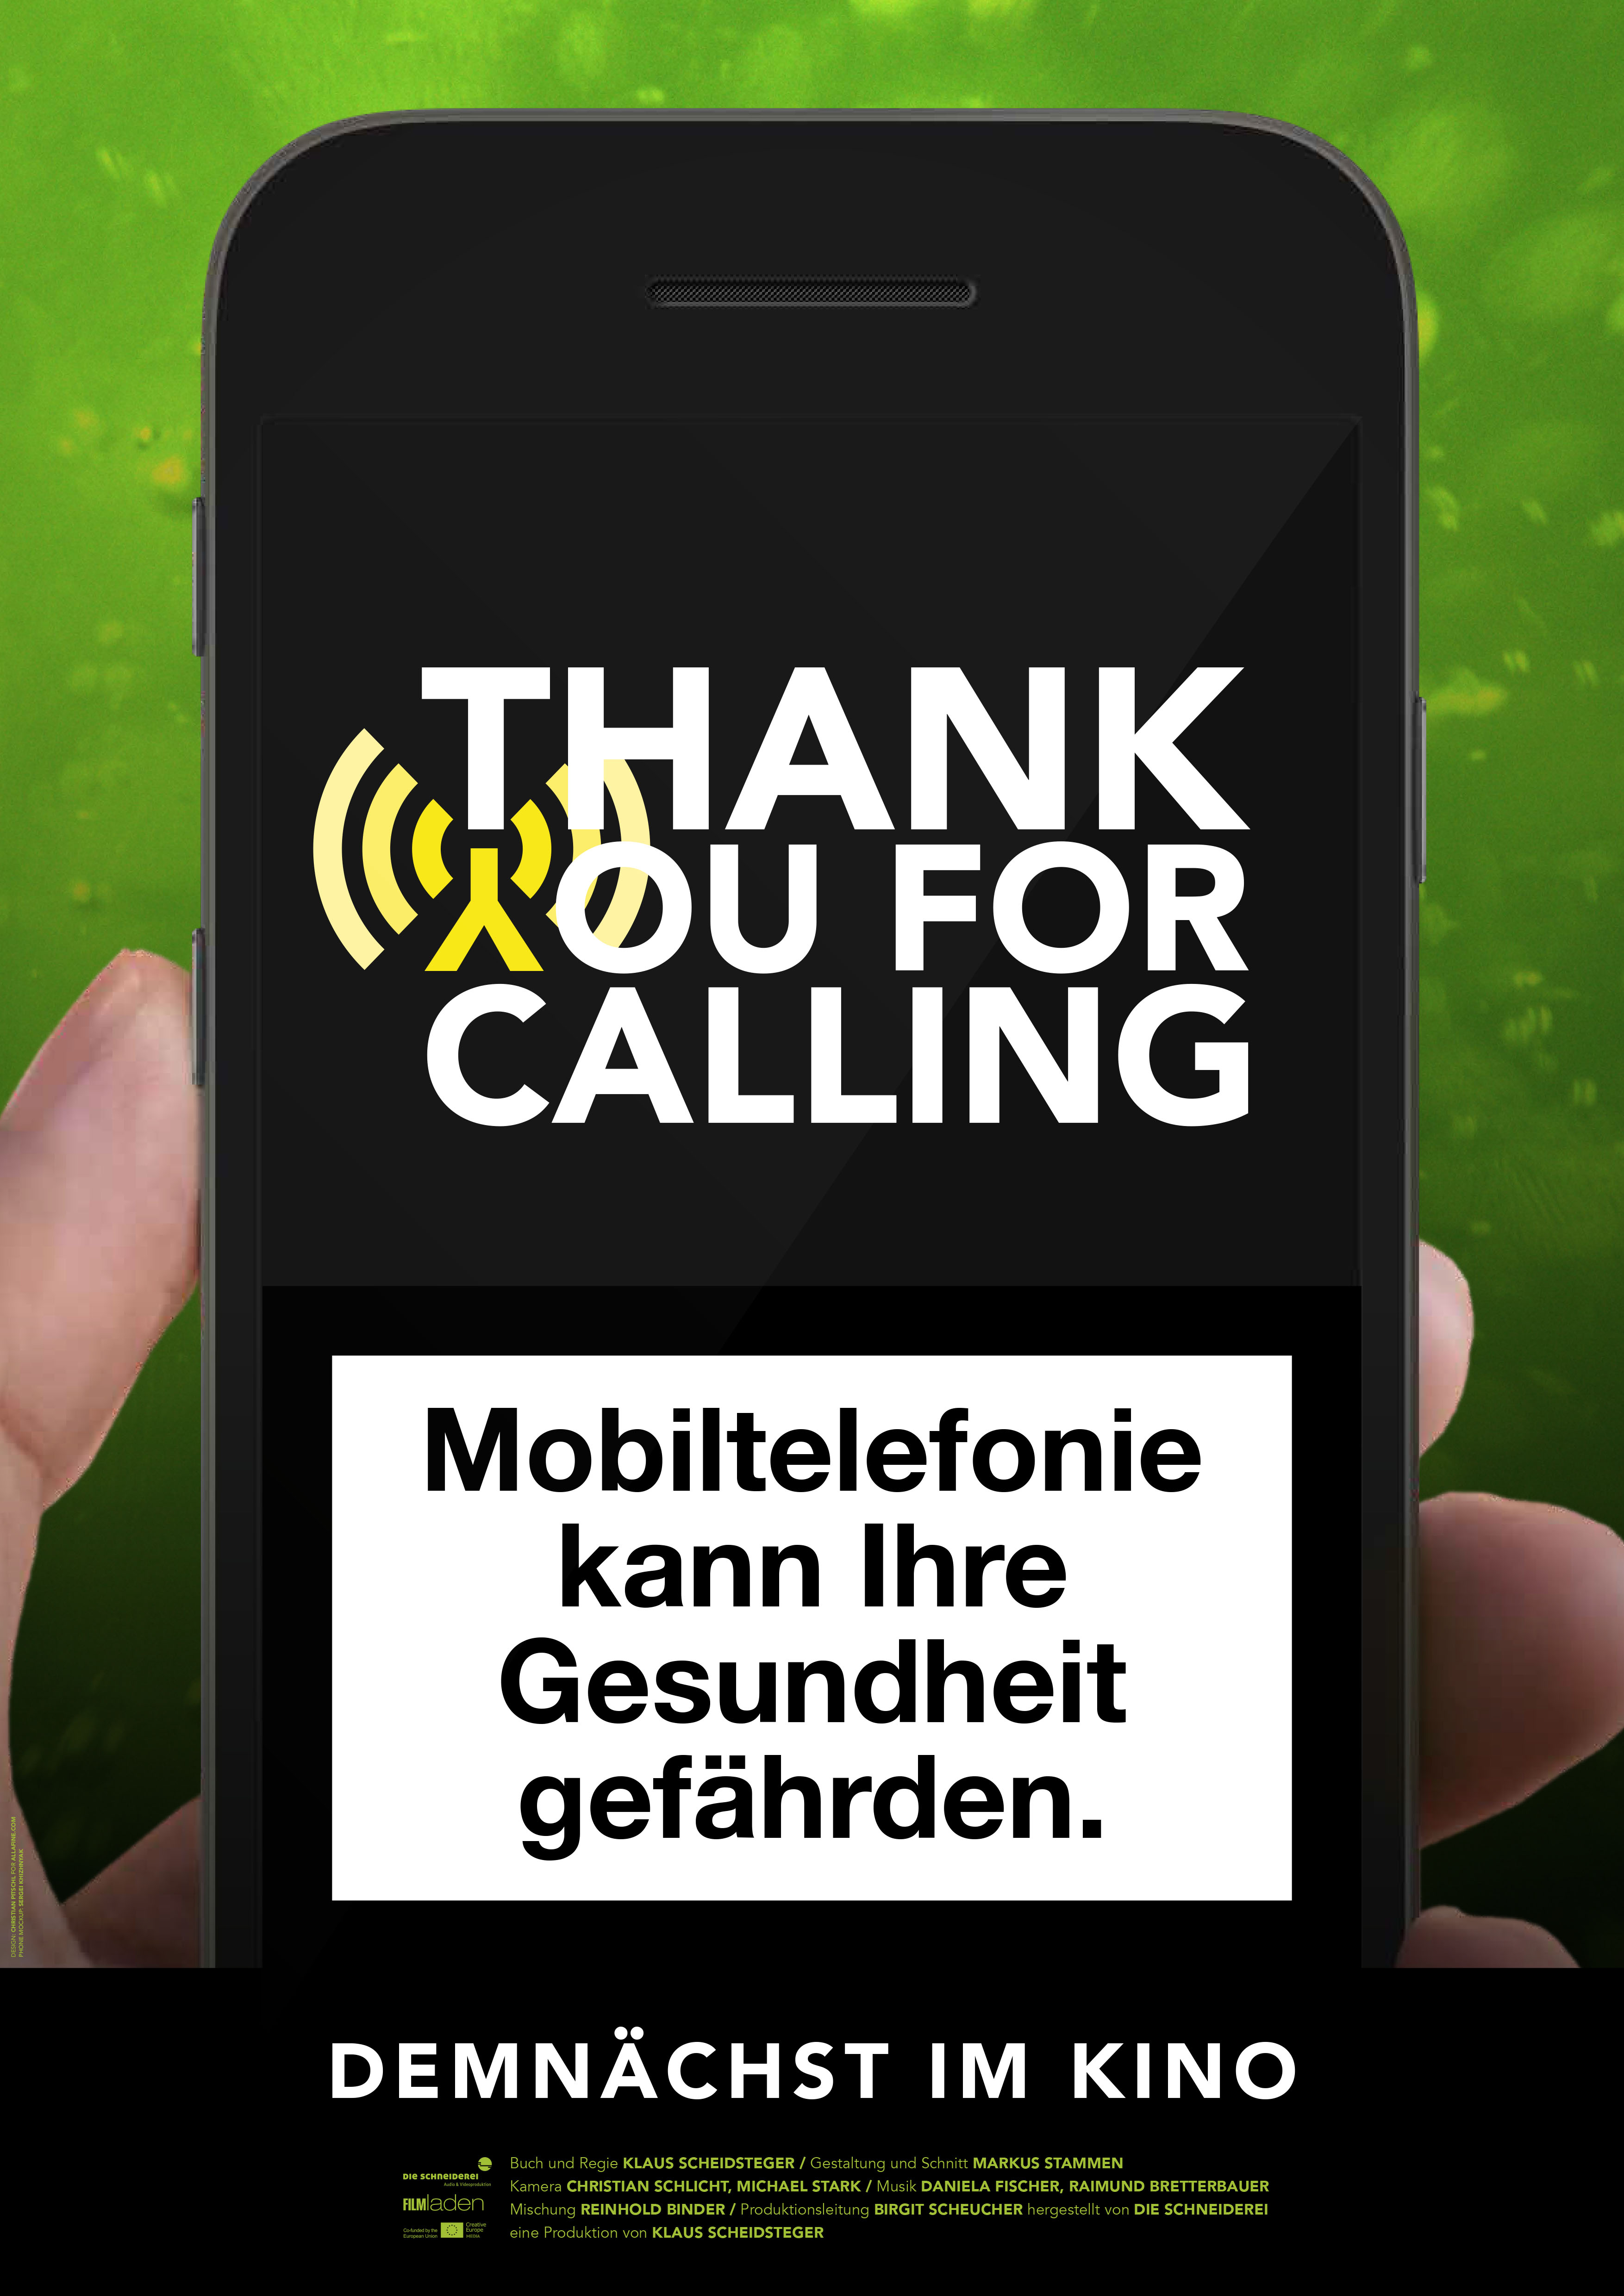 The calling thank you. Thanks for calling. Thanks for calling QUICKTEL.